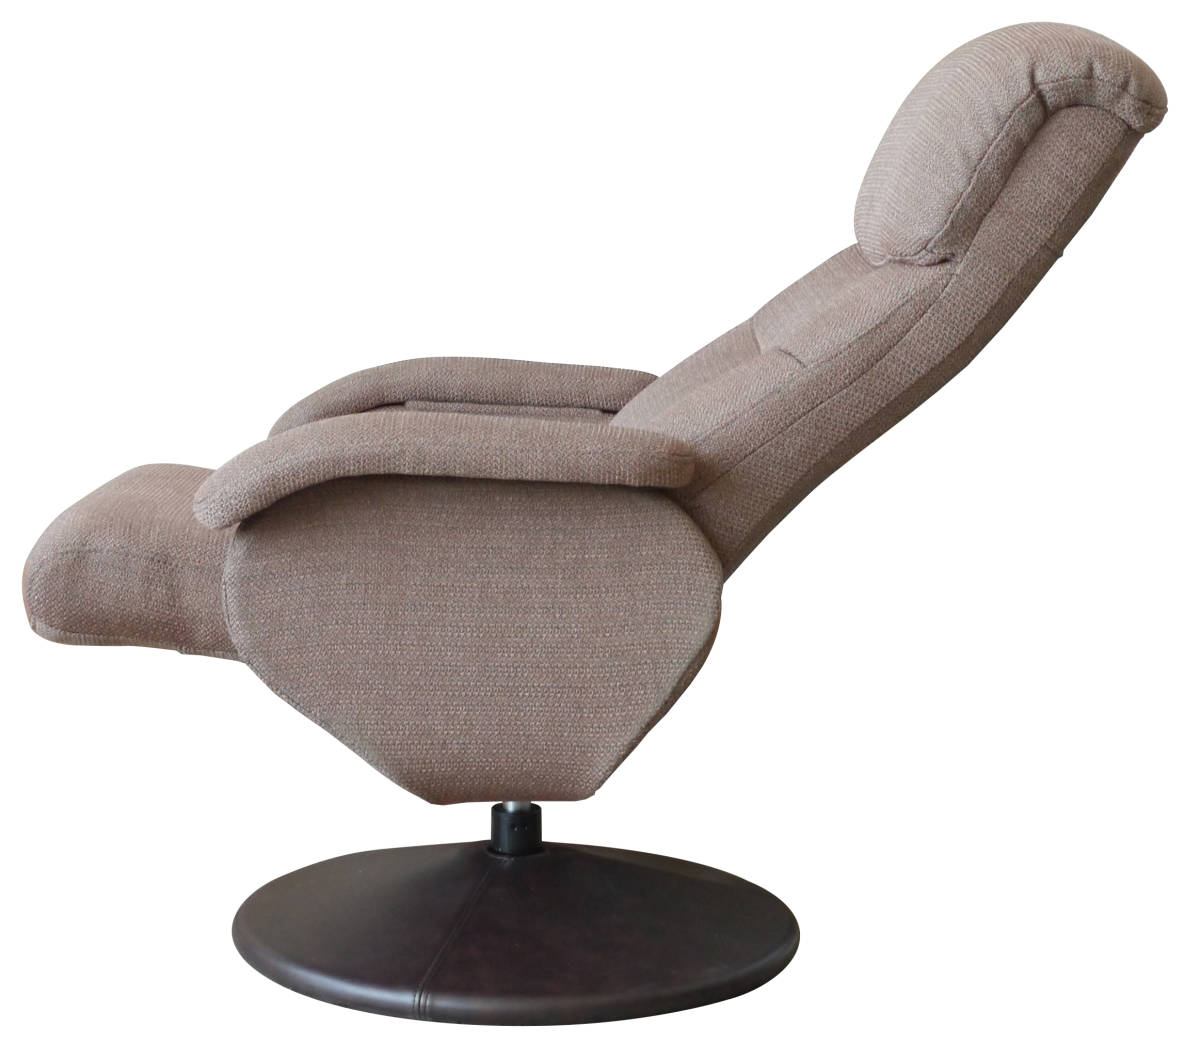 / new goods / free shipping / feel of is good fabric material / personal chair / ottoman attaching / pair . throwing .. relax / rotation + reclining function / is possible to choose 2 color 